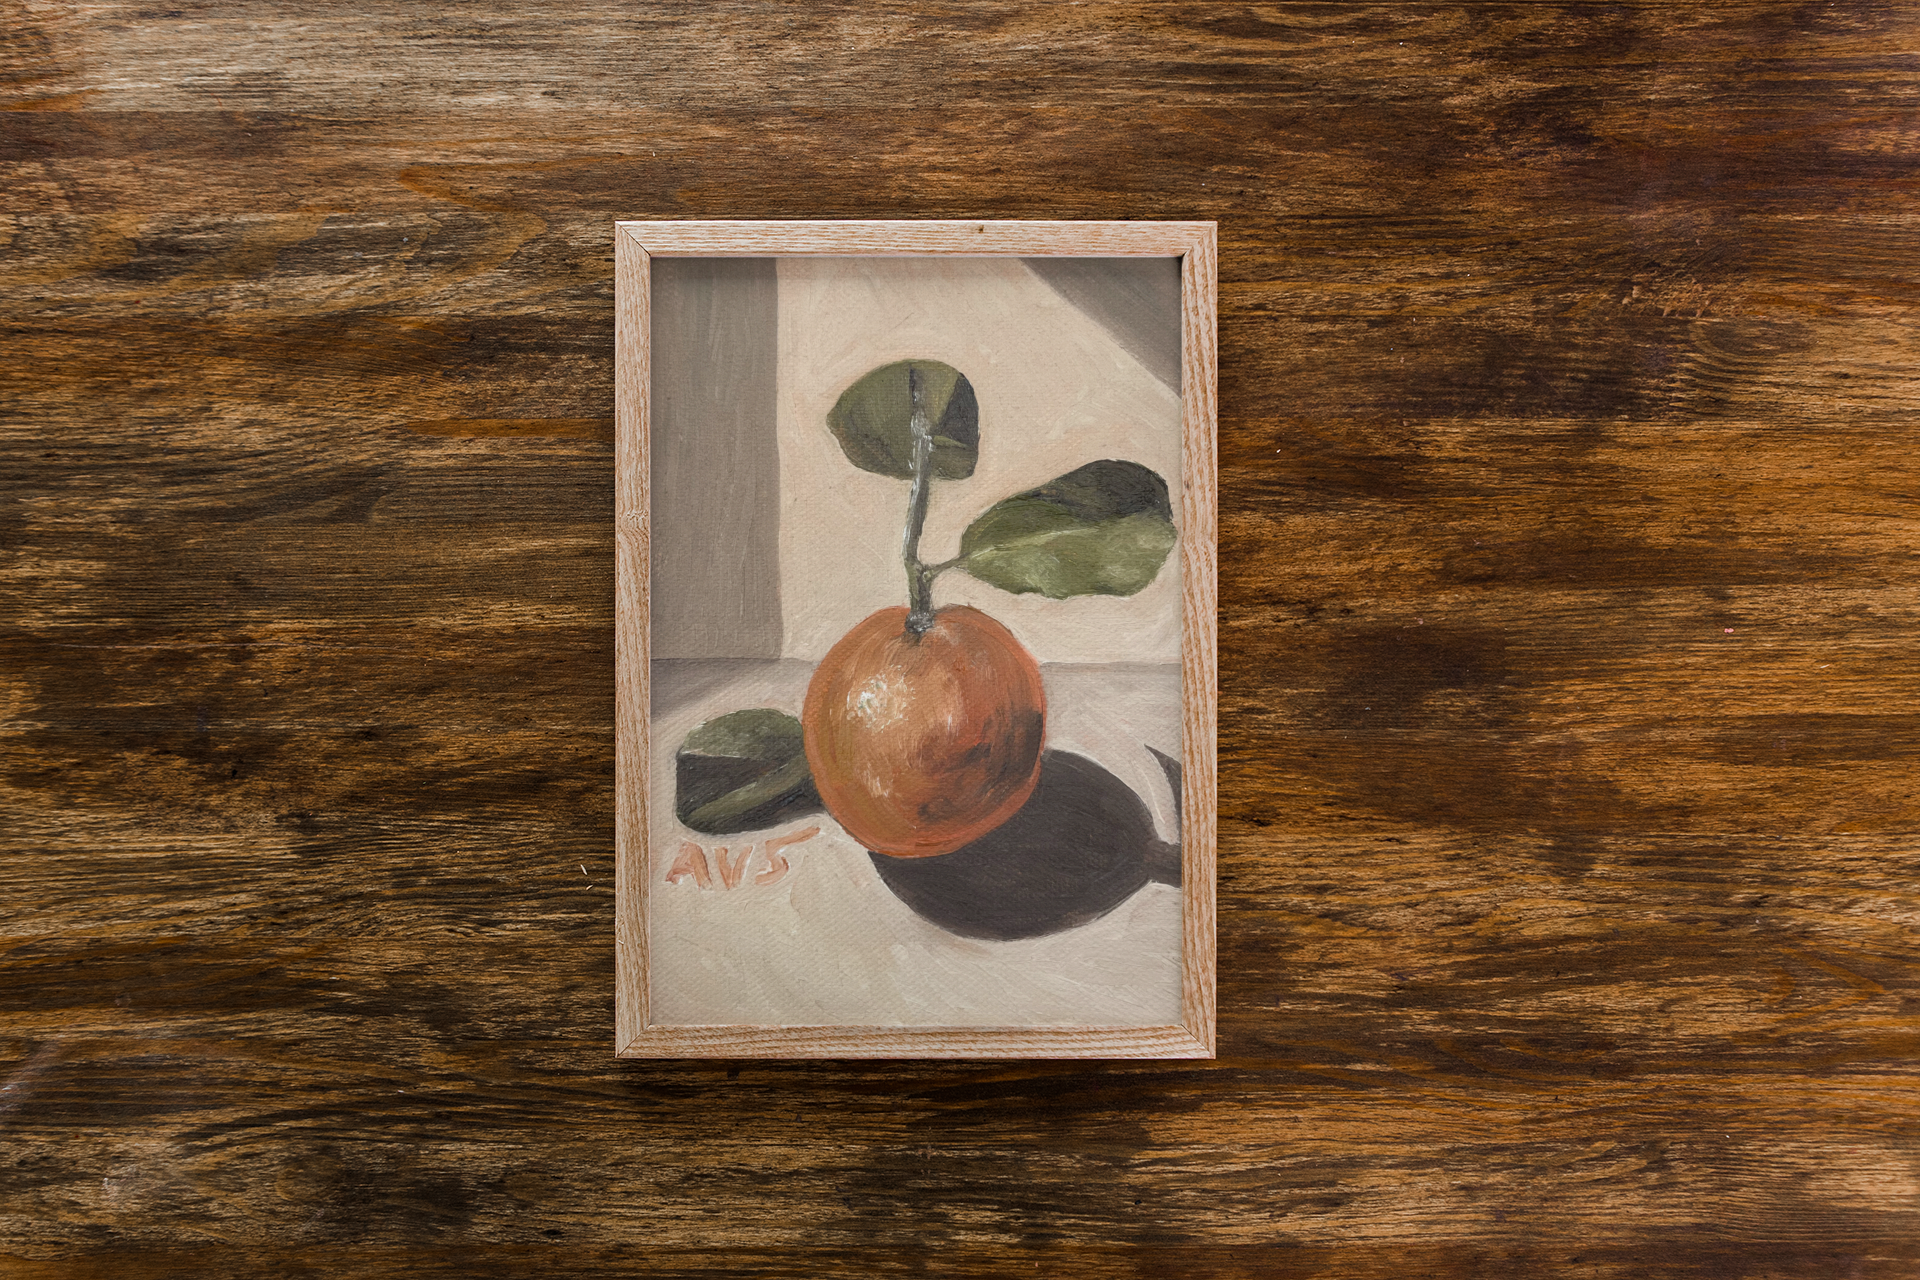 mockup-of-a-framed-art-print-placed-on-a-wooden-surface-36126-r-el2 copy.png